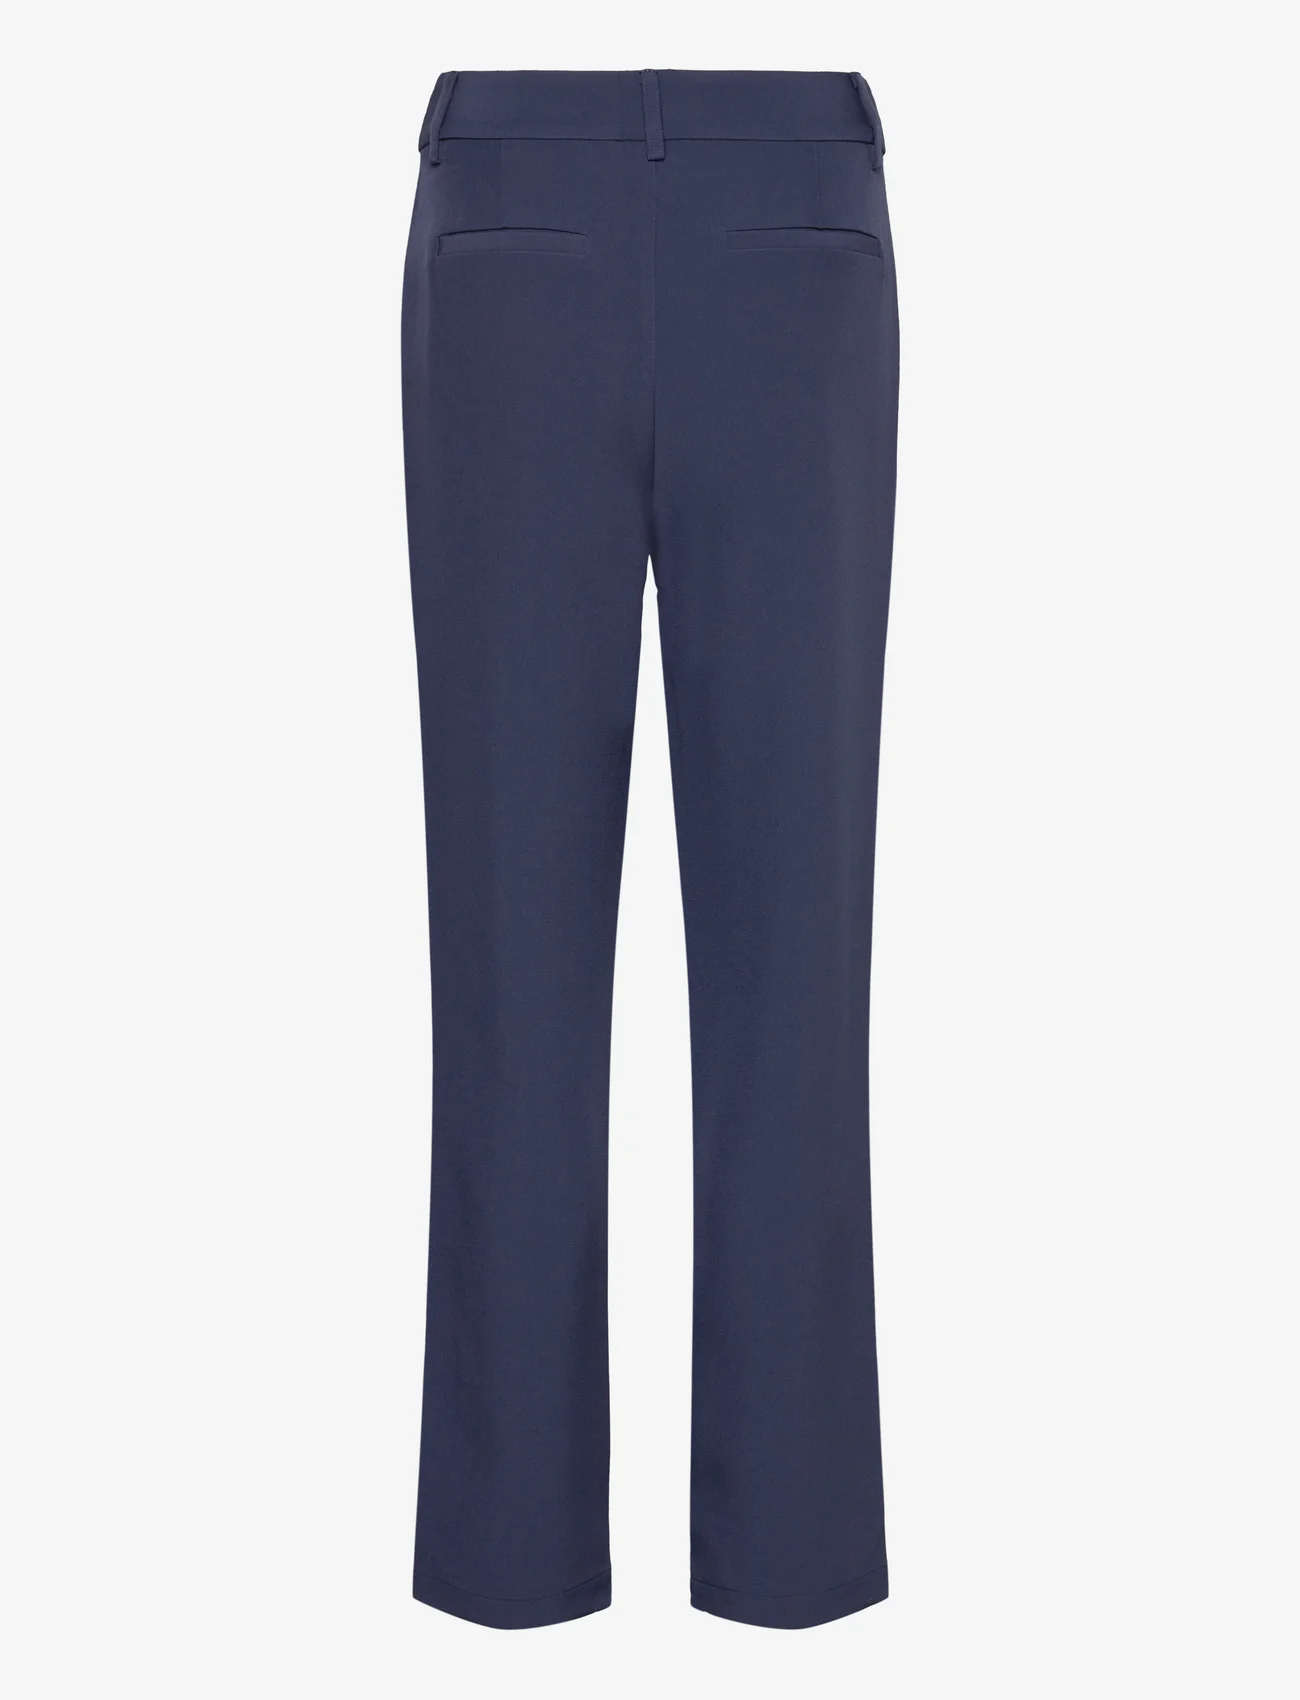 Rosemunde - Trousers - tailored trousers - navy - 1